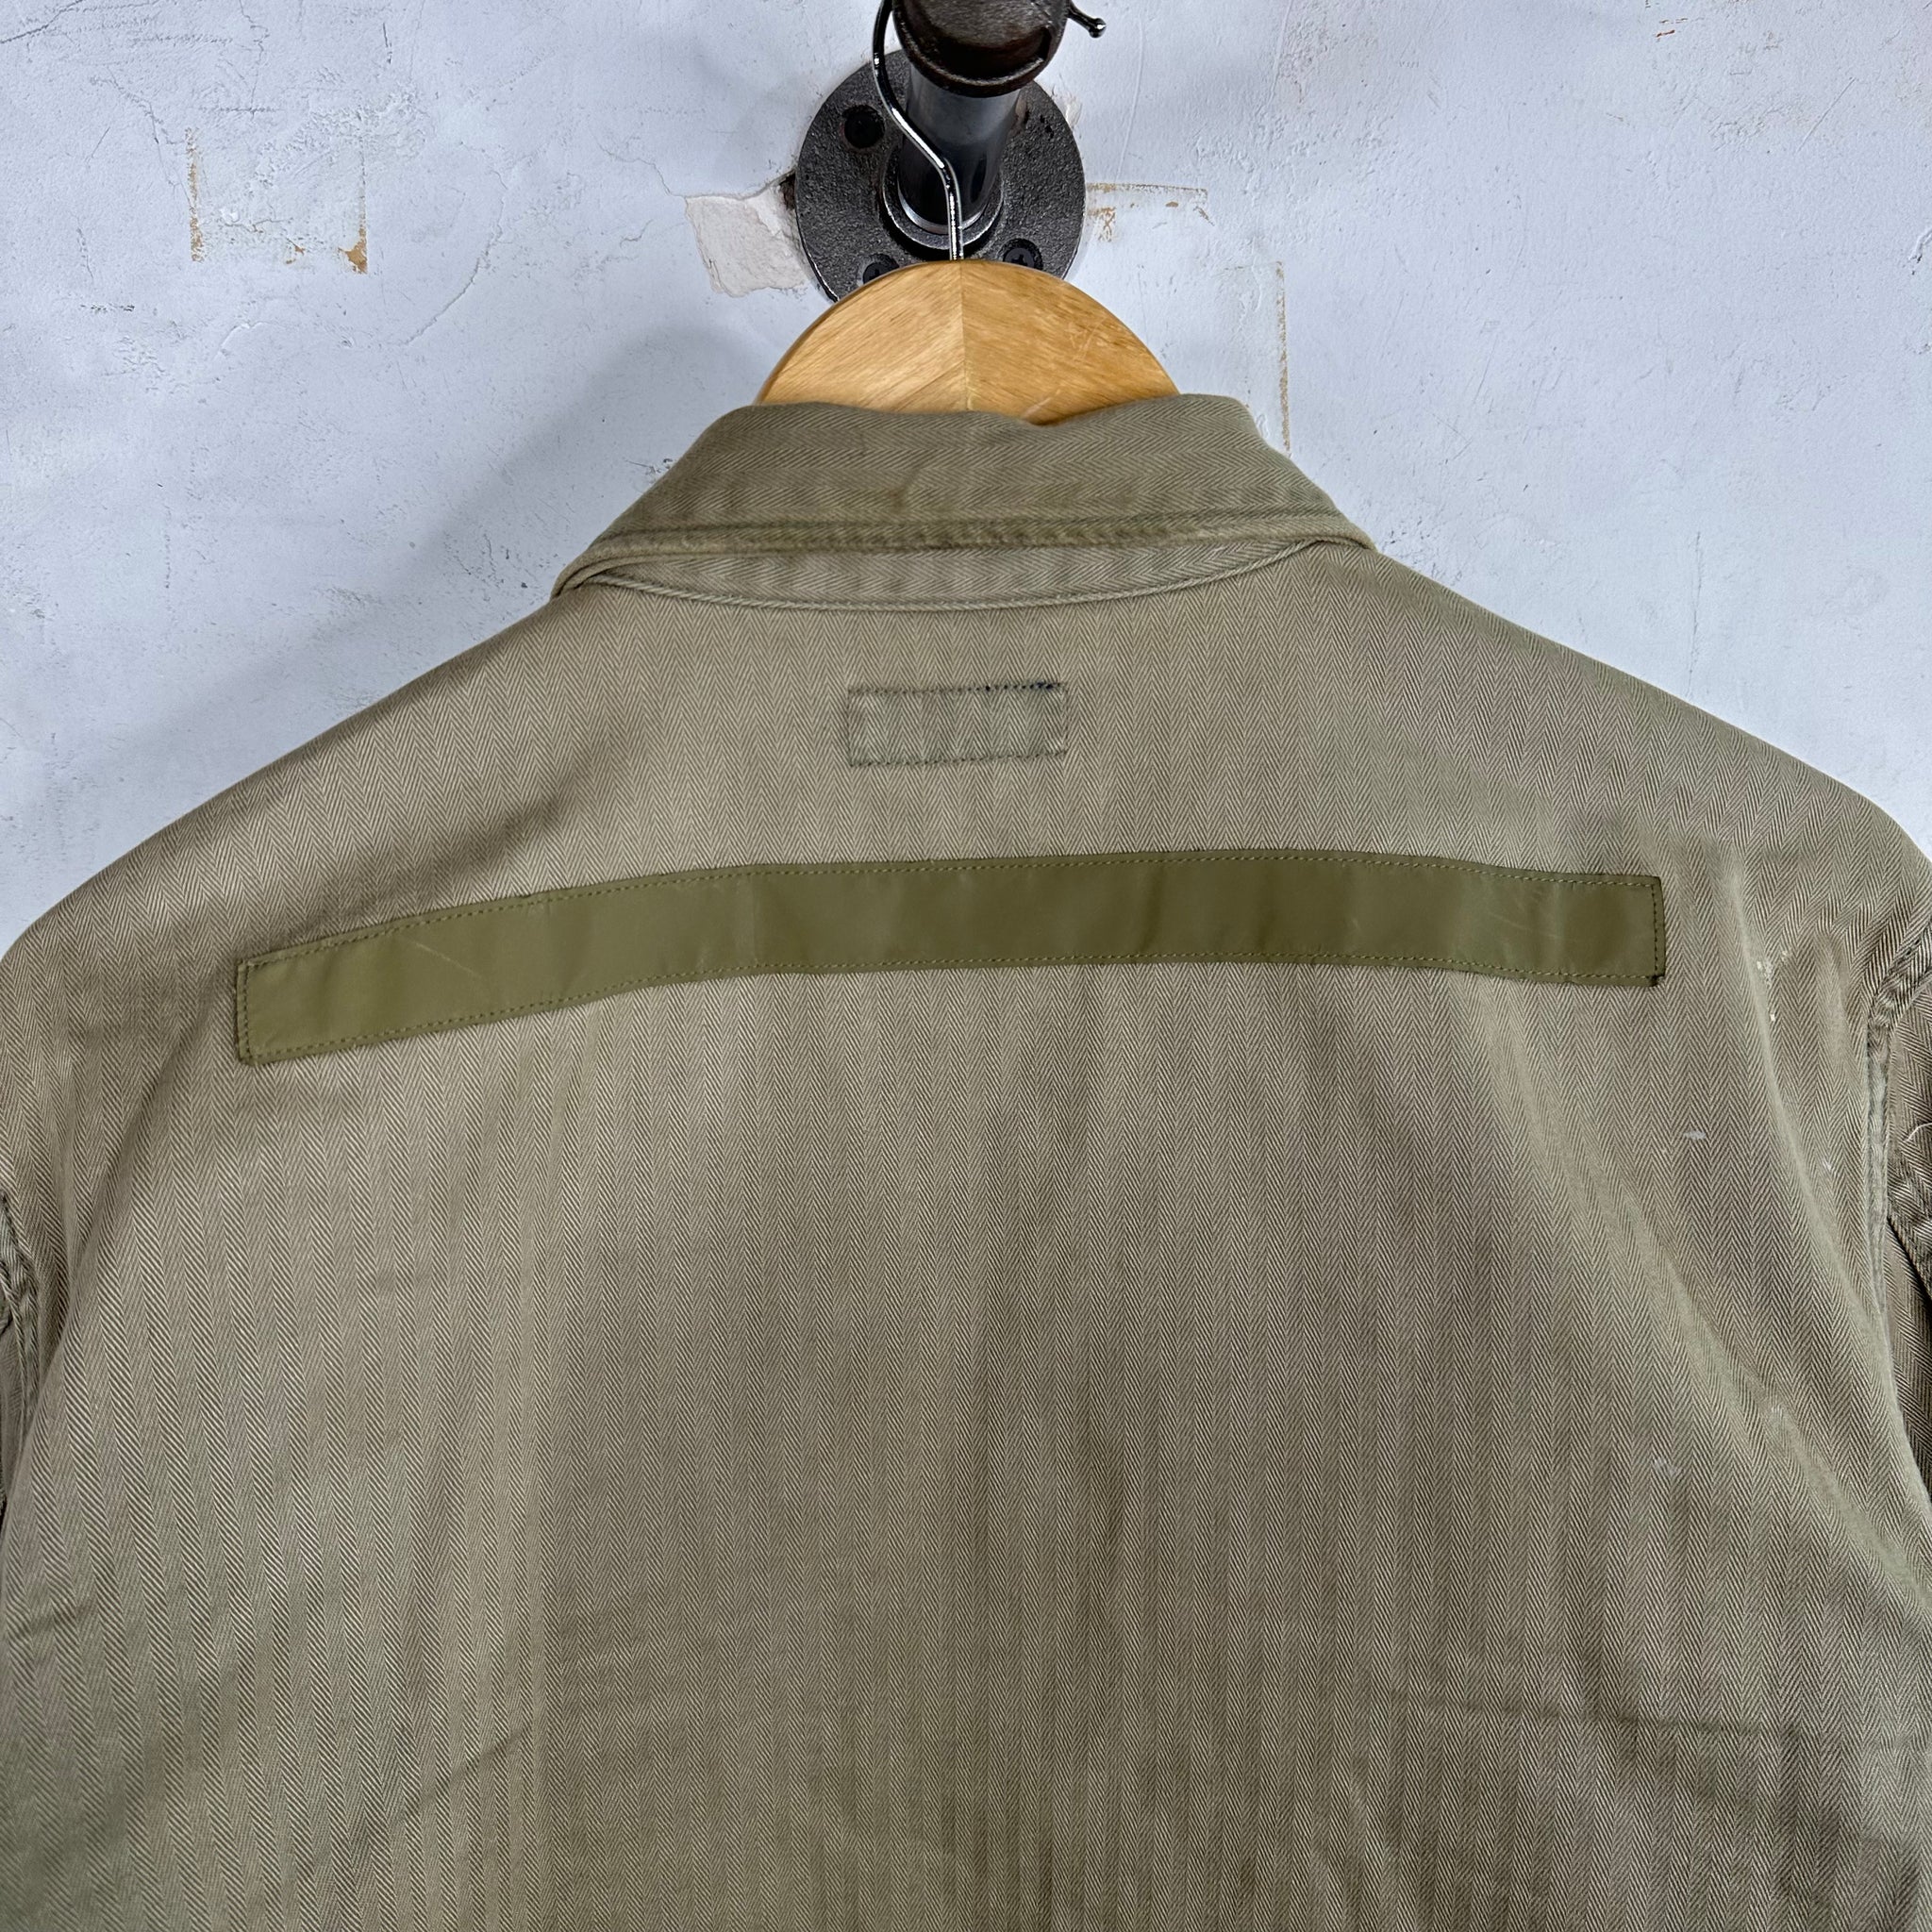 Ralph Lauren Patched Army Fatigue Jacket